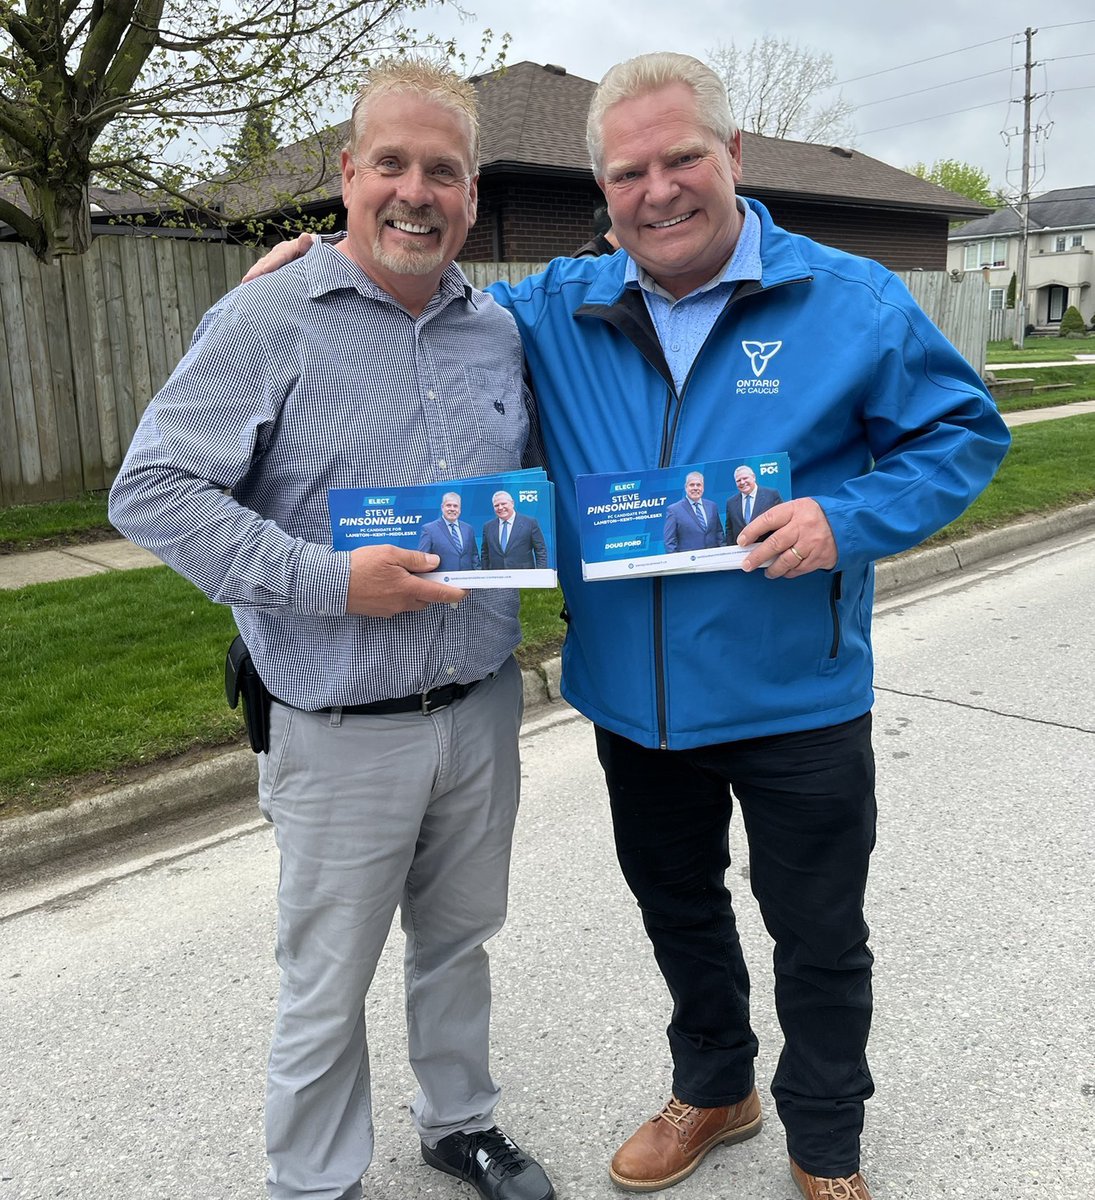 Congrats to @zeeinmilton and @spinsonneaultpc on your impressive victories tonight in #Milton and #LKM. Looking forward to working together with you at Queen's Park! #GotItDone